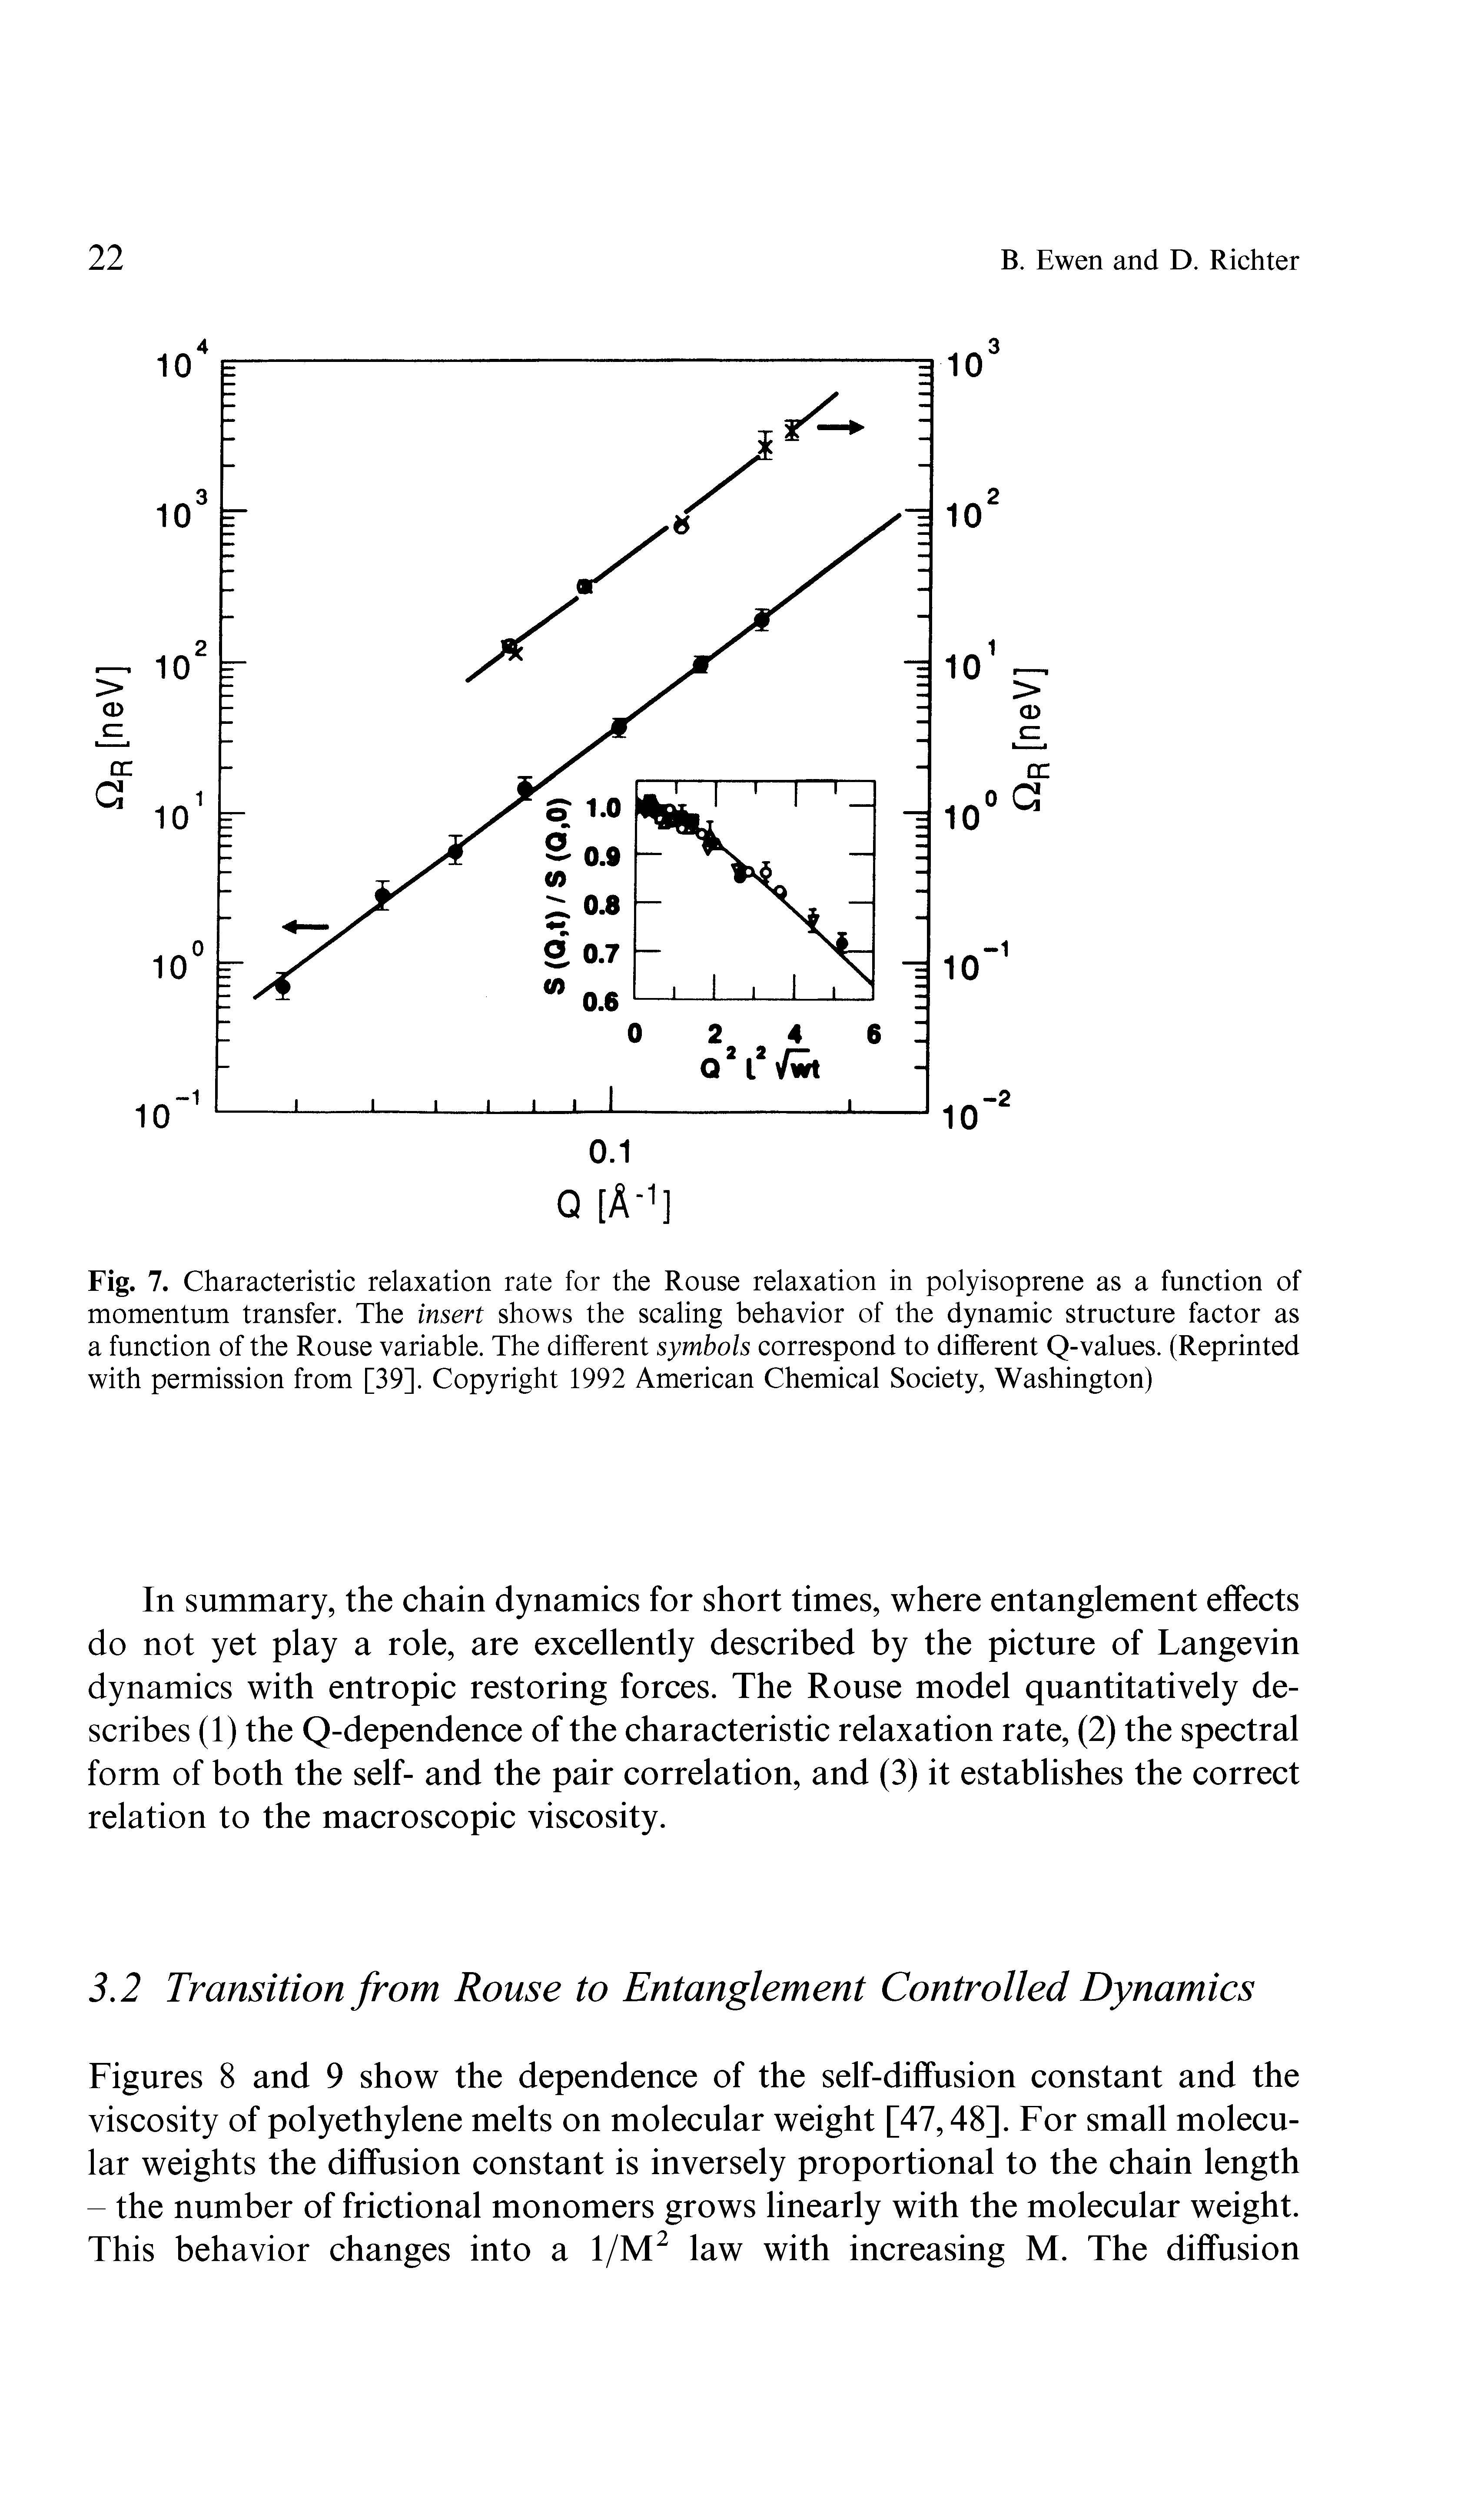 Figures 8 and 9 show the dependence of the self-diffusion constant and the viscosity of polyethylene melts on molecular weight [47,48]. For small molecular weights the diffusion constant is inversely proportional to the chain length - the number of frictional monomers grows linearly with the molecular weight. This behavior changes into a 1/M2 law with increasing M. The diffusion...